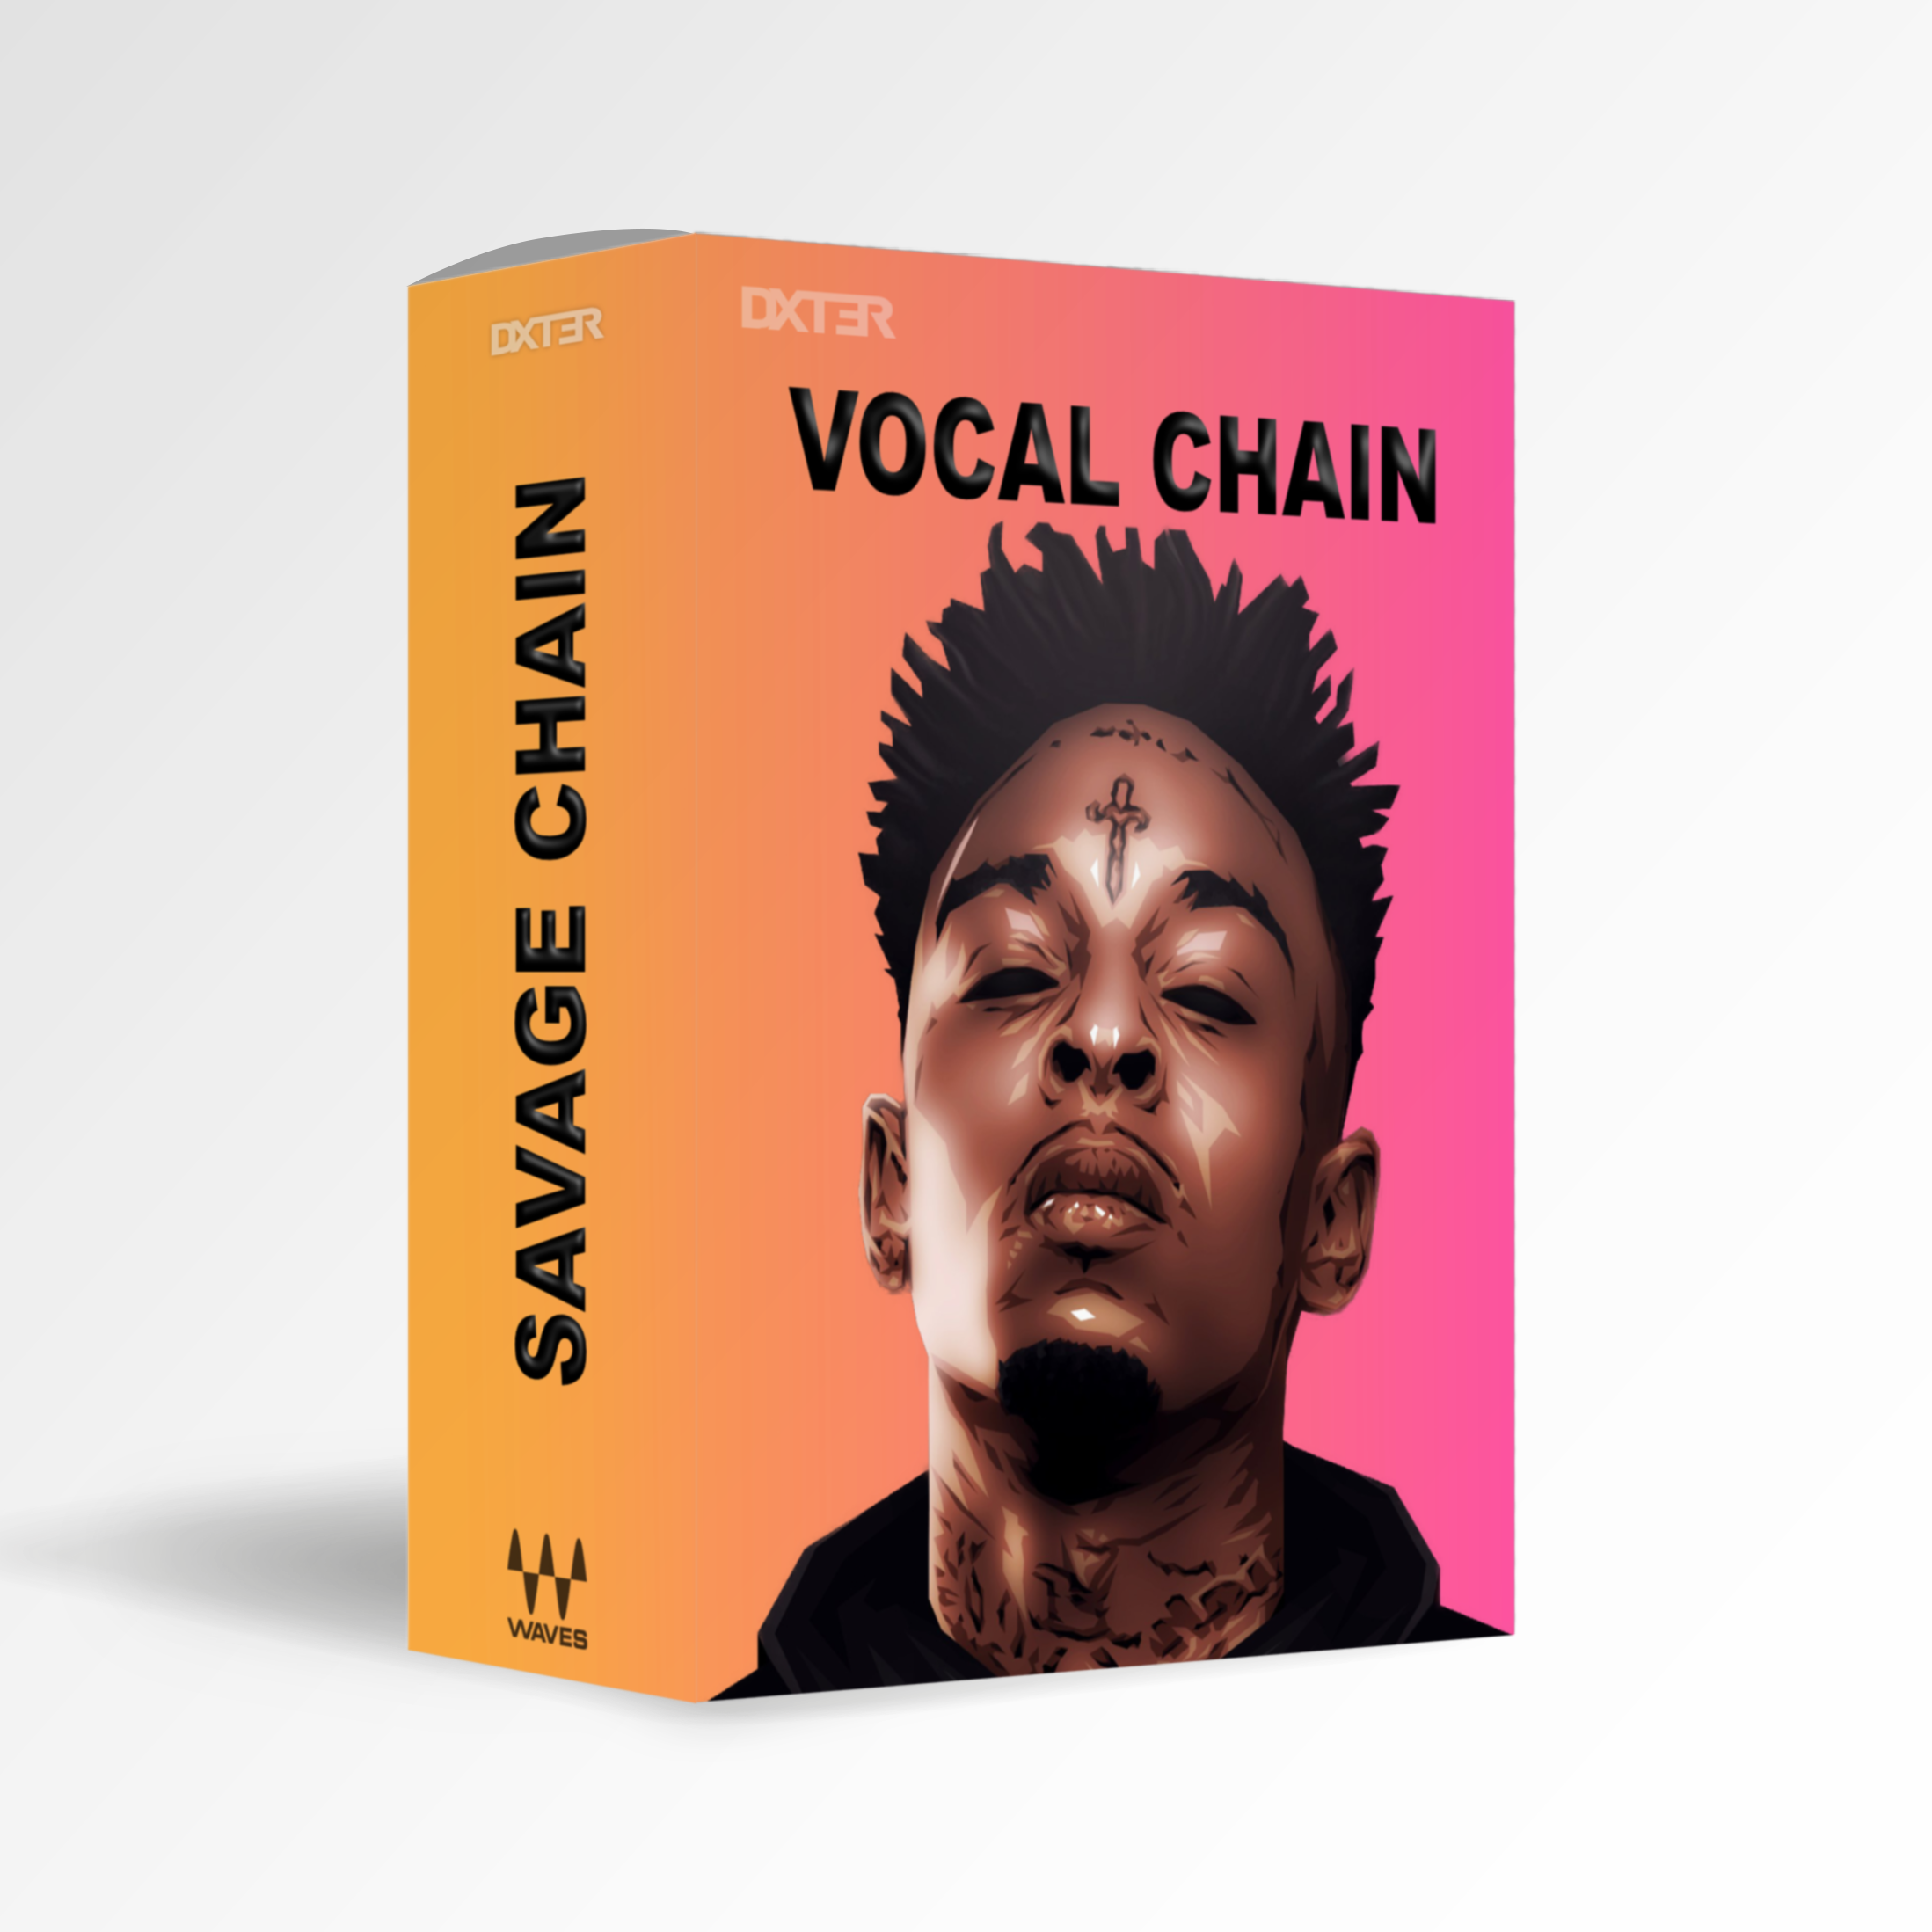 21 Savage type Vocal Chain | DXT3R